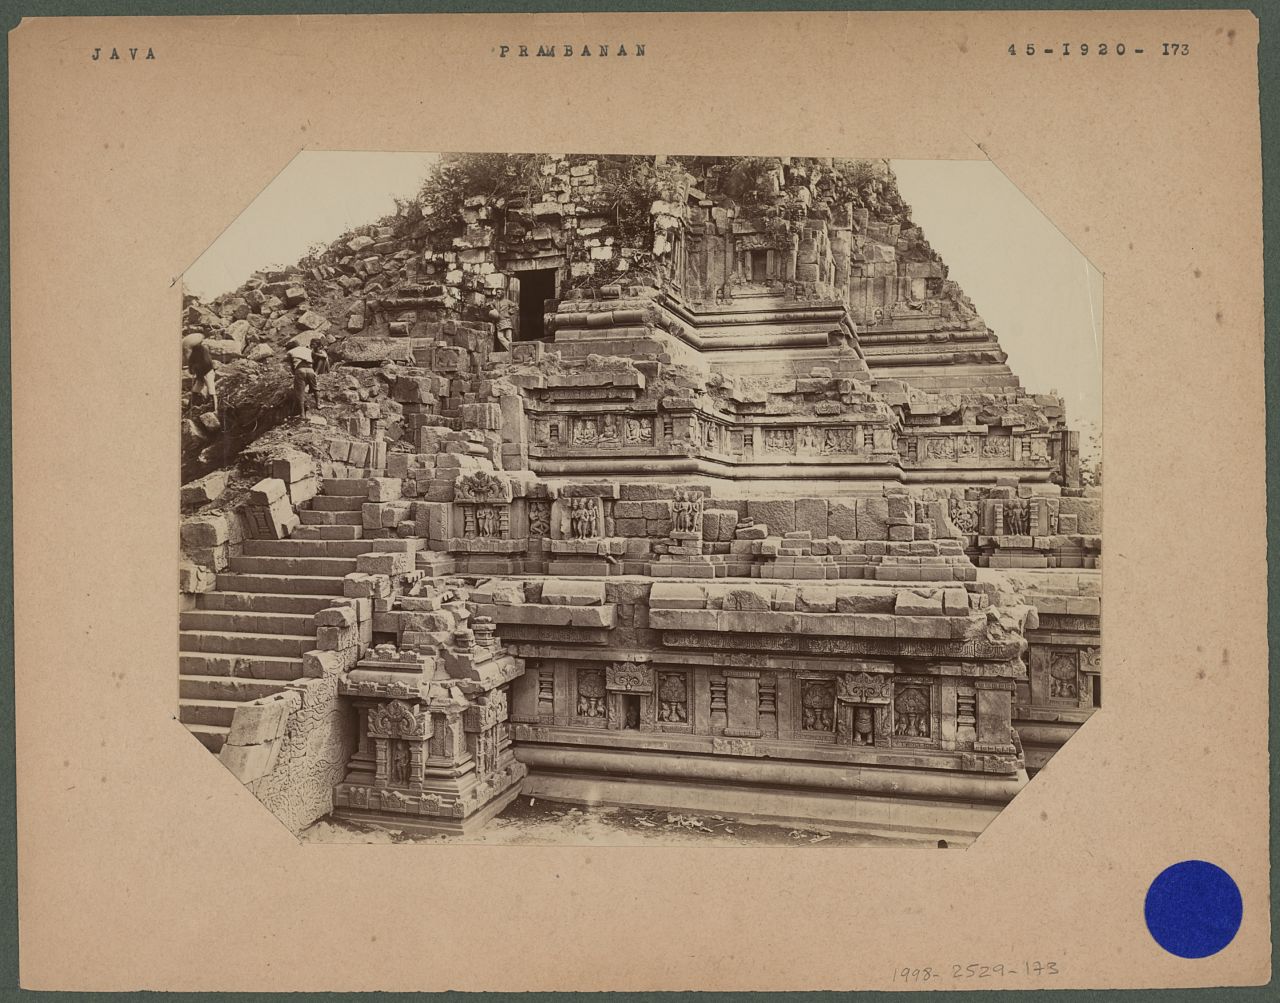 In what Barthe calls "a very early example of a selfie," photographer Kassian Cephas can be seen standing by the temple entrance.